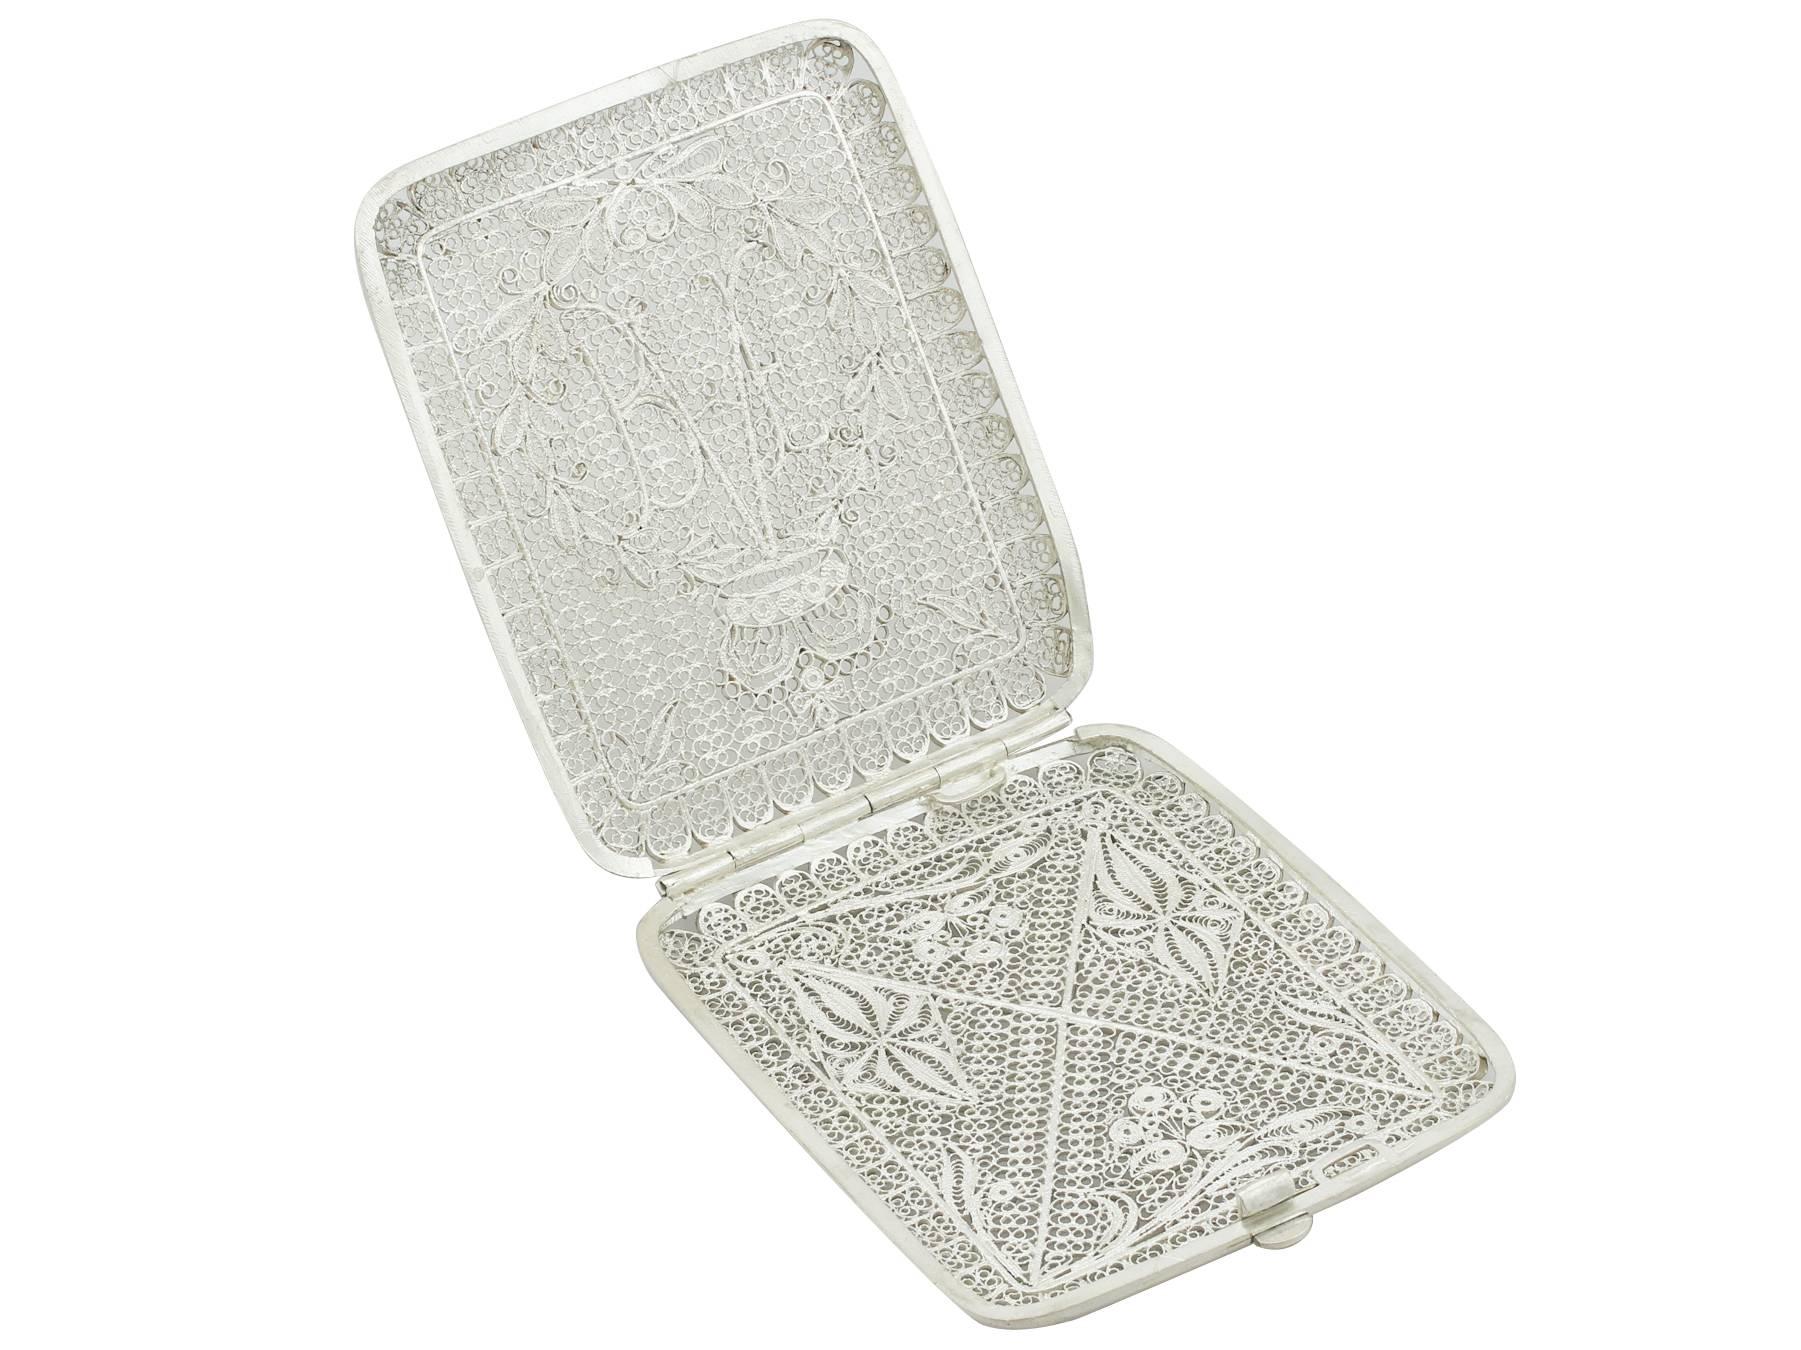 Mid-20th Century Vintage, 1940s Indian Sterling Silver Cigarette Case